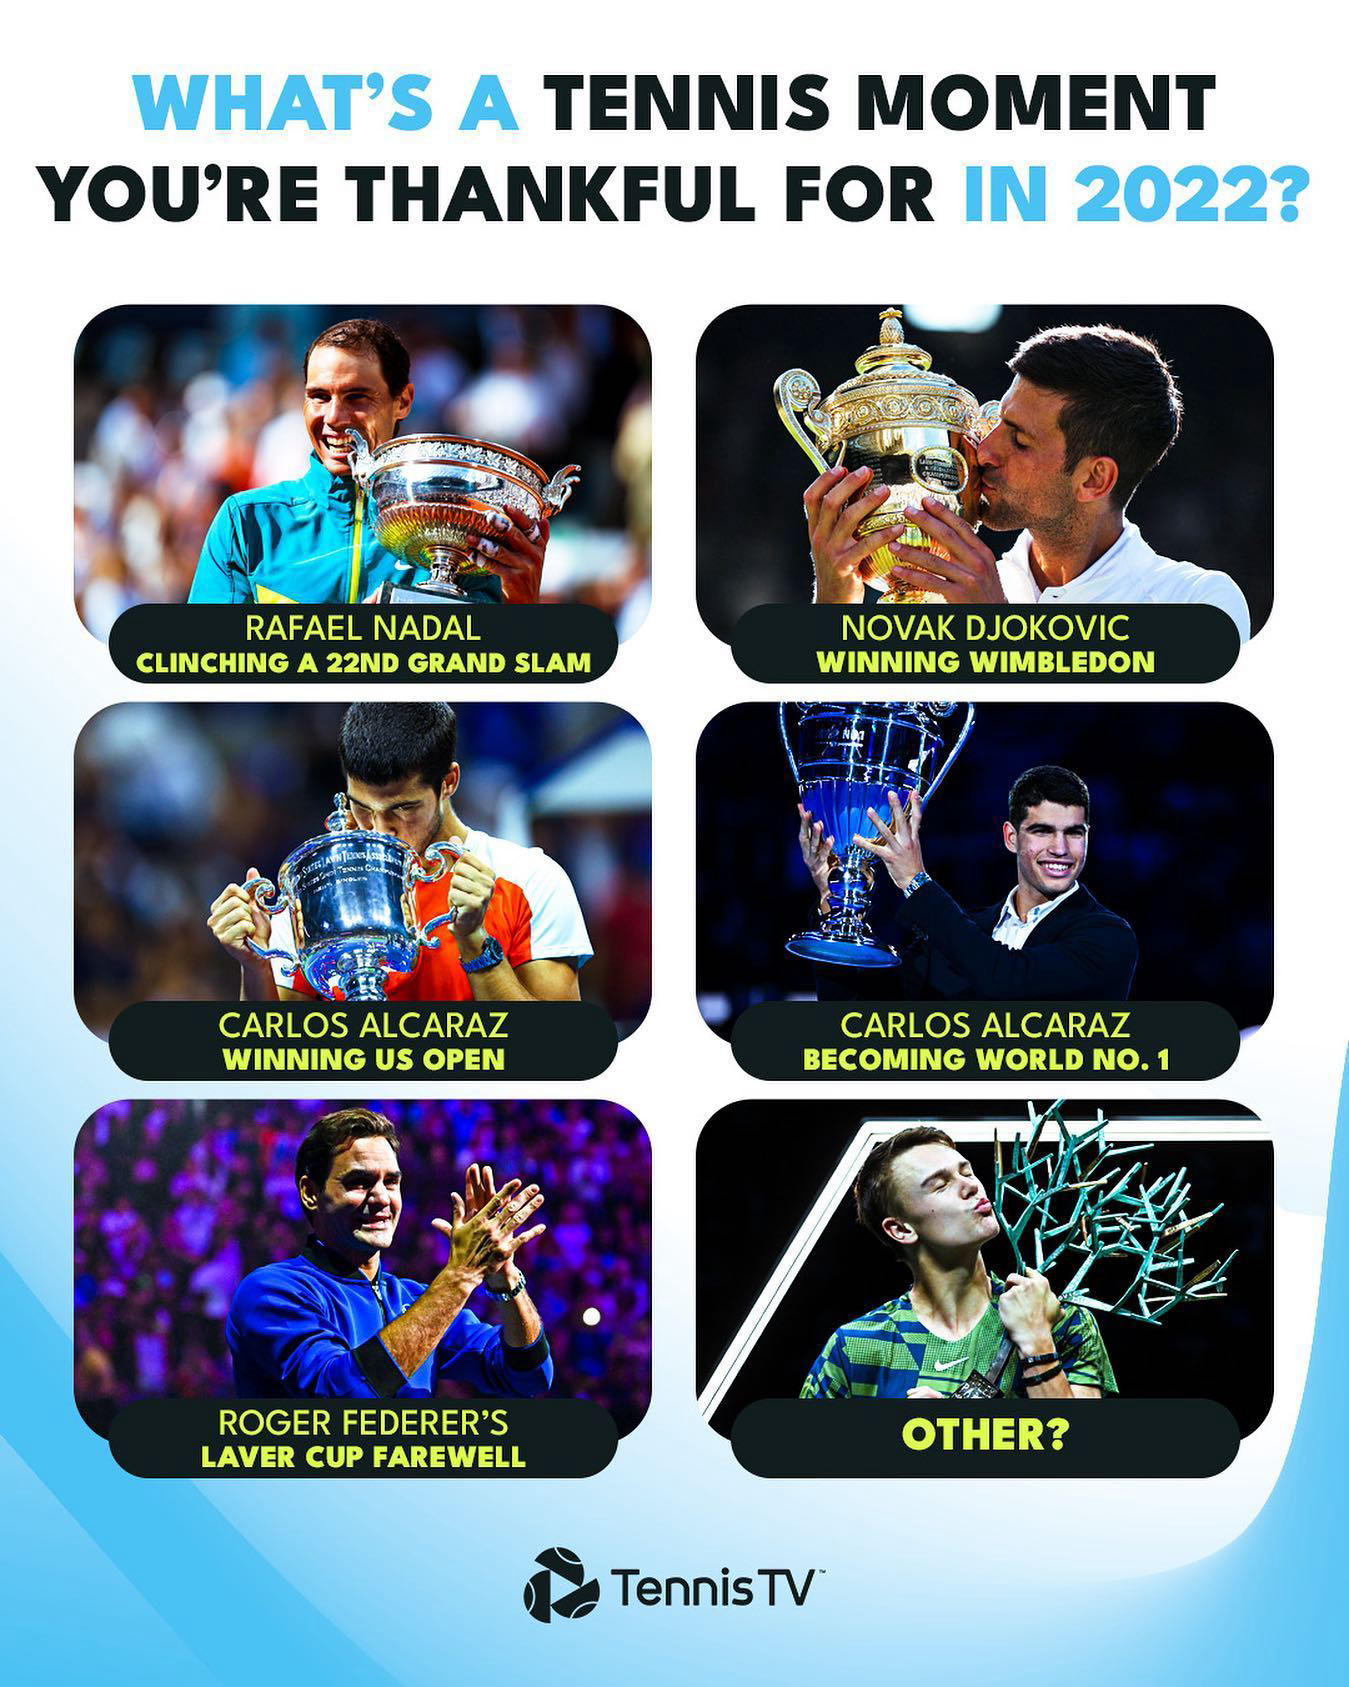 Tennis TV - What are you thankful for in 2022